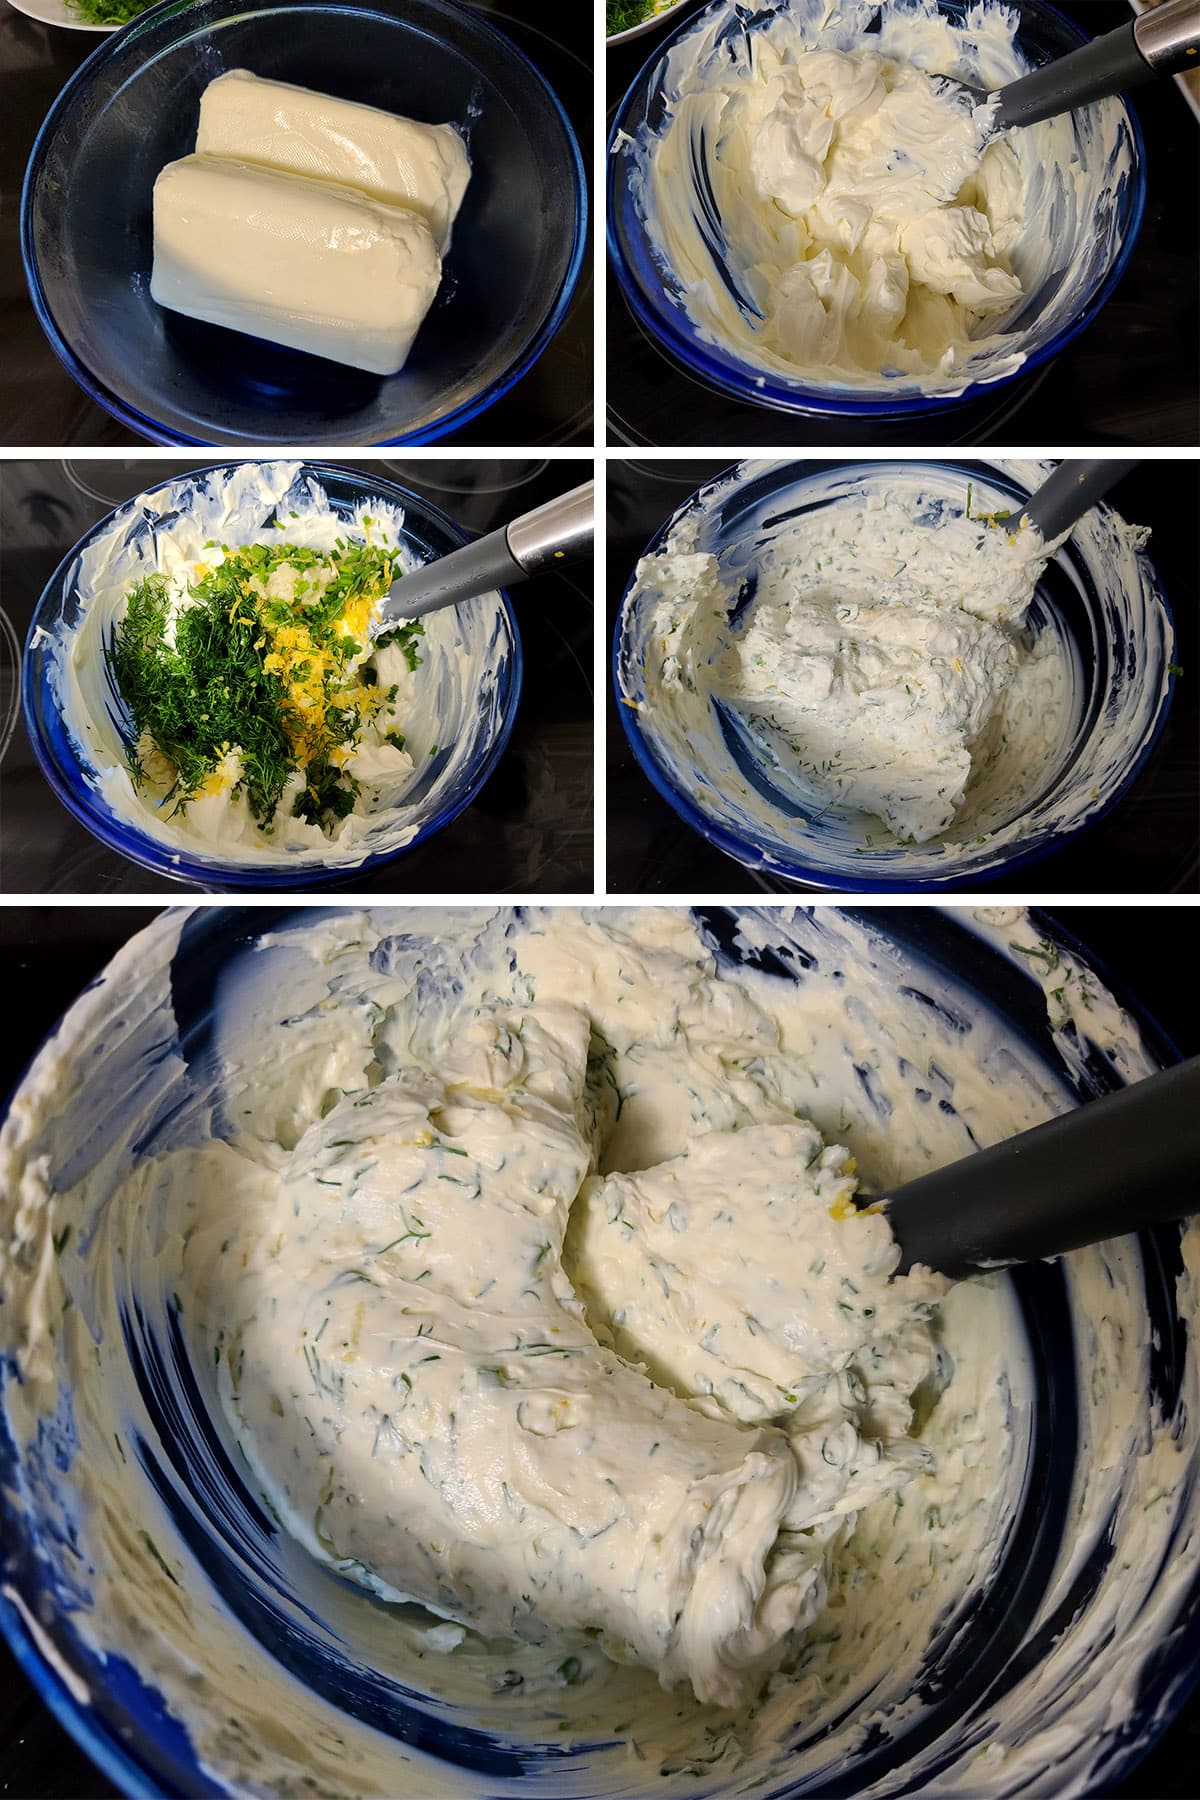 A 5 part image showing 2 bricks of cream cheese being beaten, the flavour ingredients being added and beaten in.